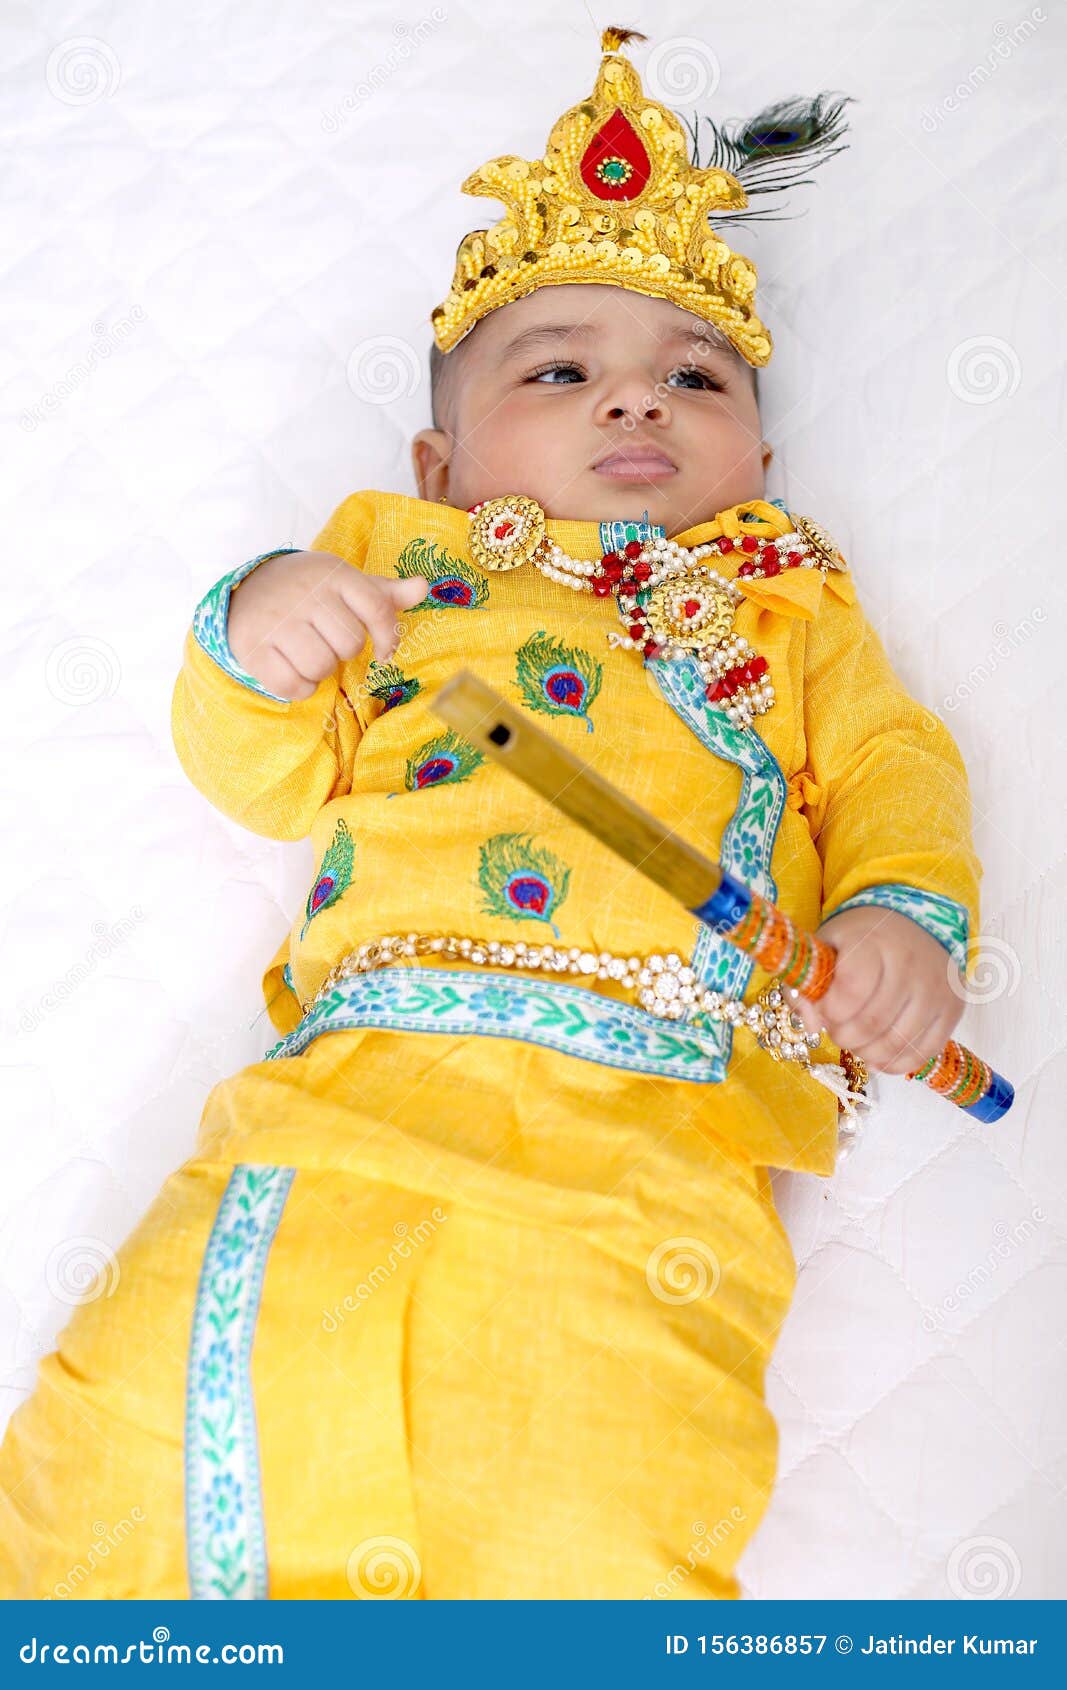 Picture of Baby krishna. stock image. Image of india - 156386857